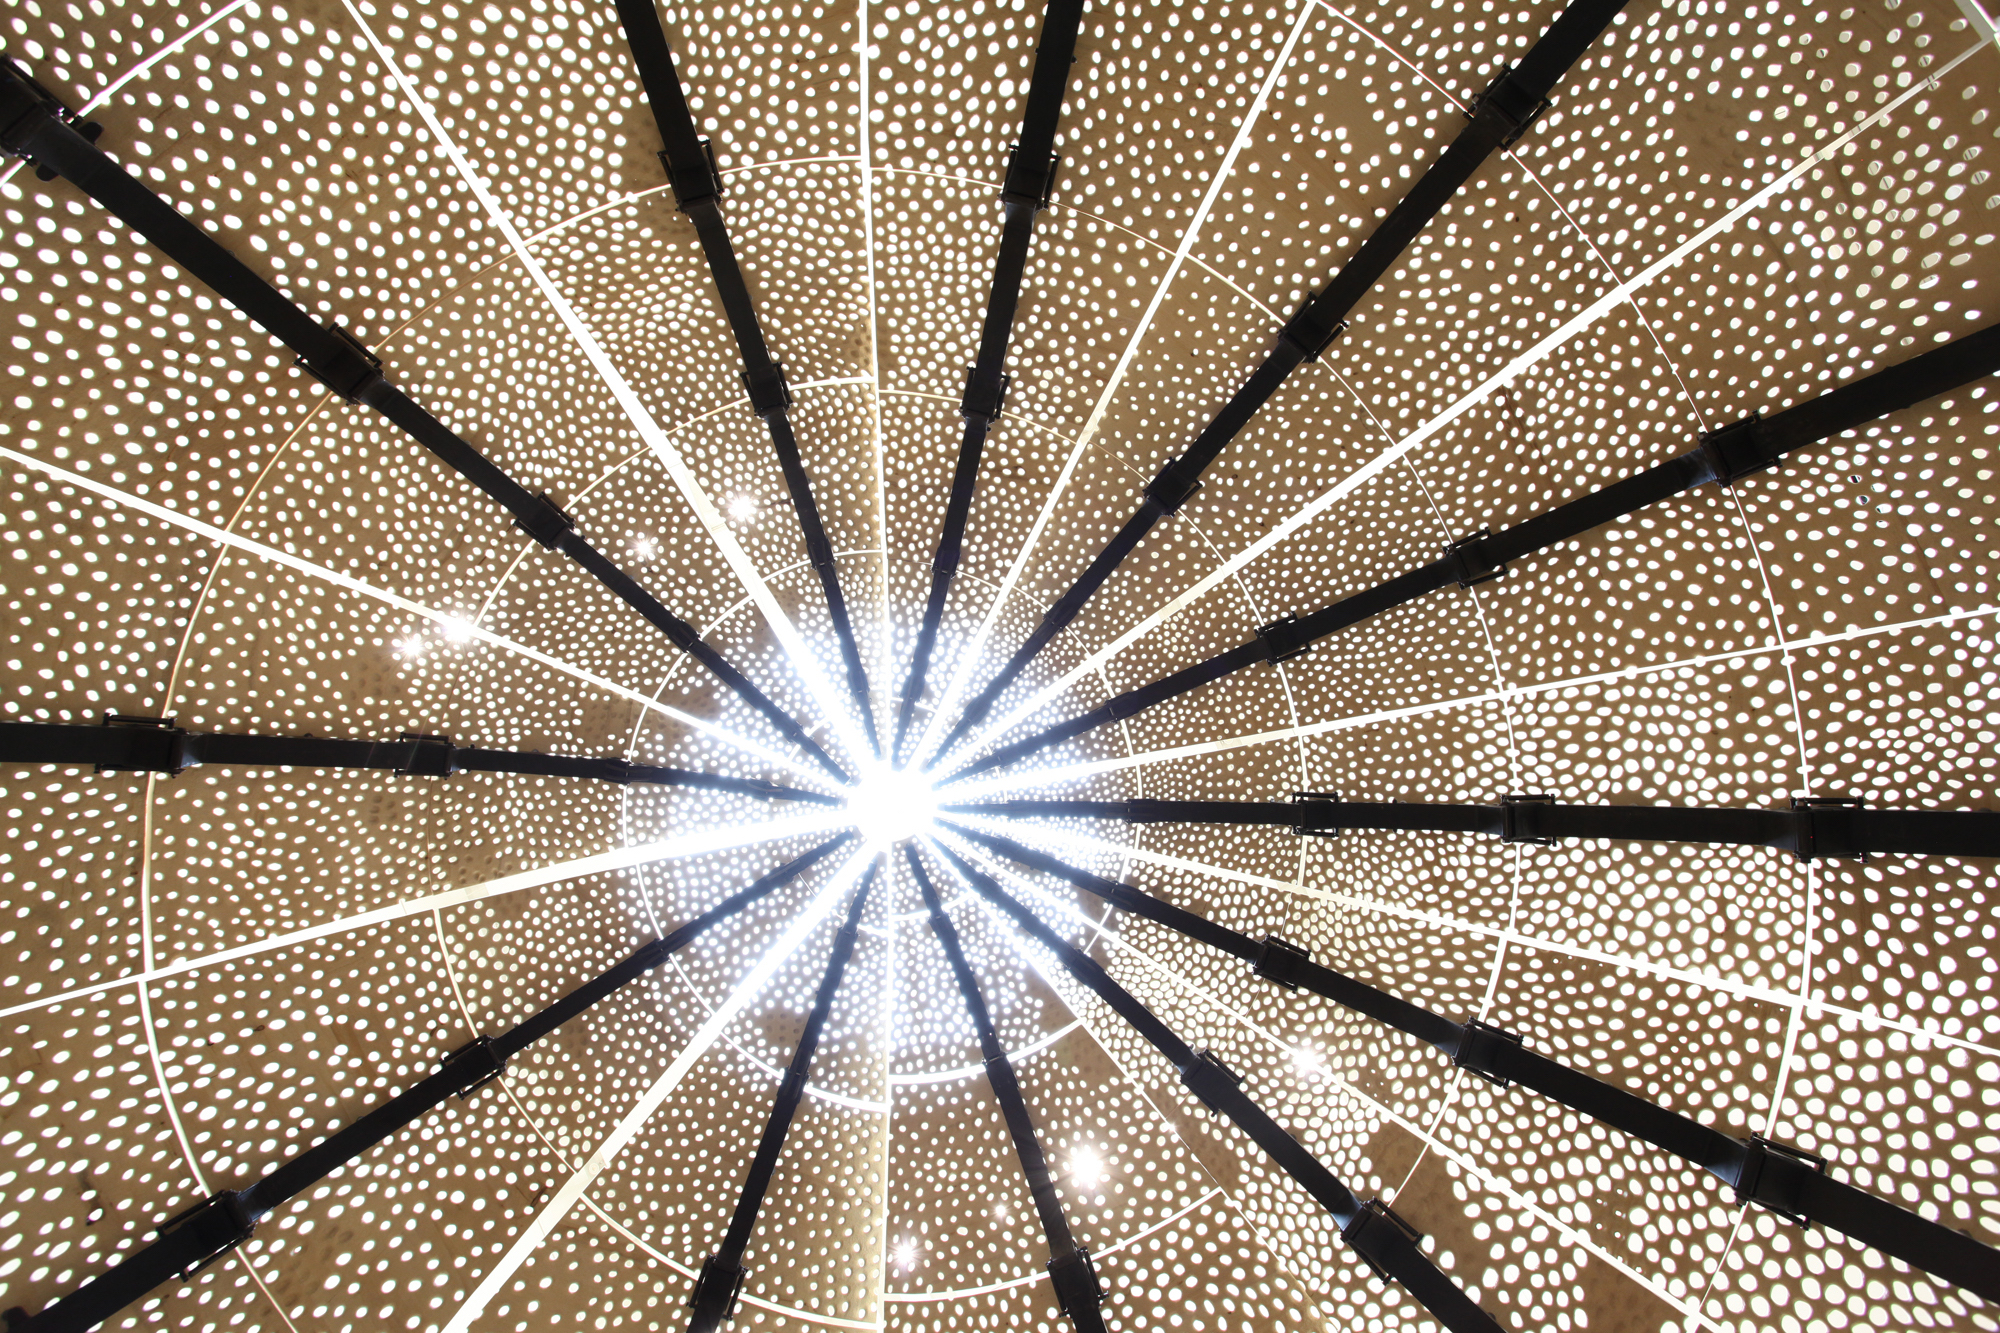 Photograph from the inside of sculpture, triangular pieces with lace-like patterns that come to a point. Light shining through center.